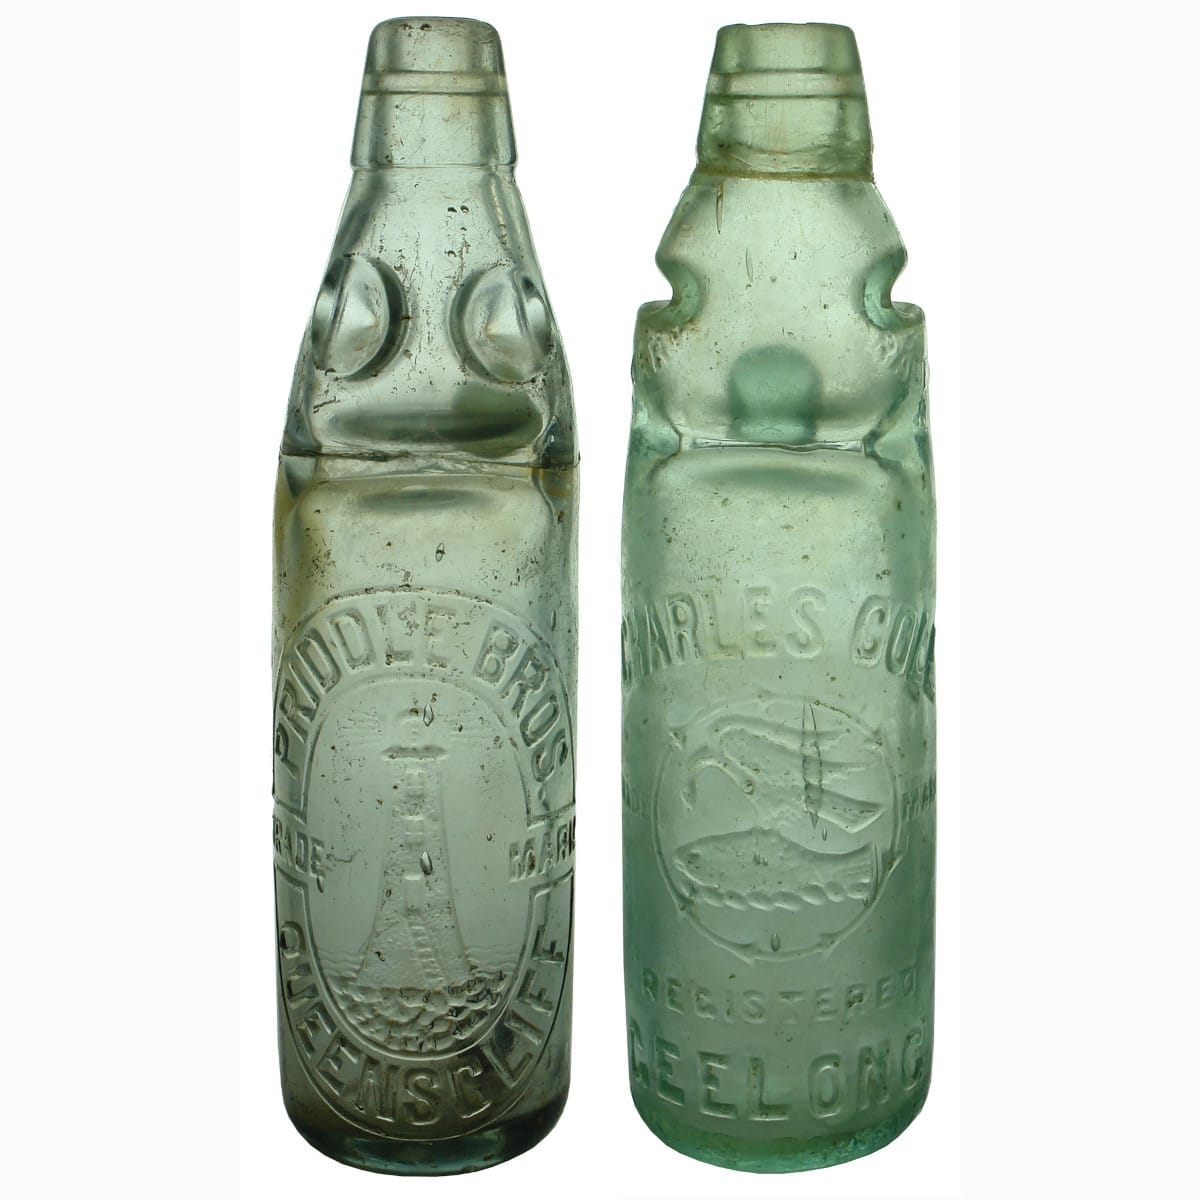 Pair of repaired Marble Bottles: Priddle, Queenscliff & Charles Cole, Geelong.